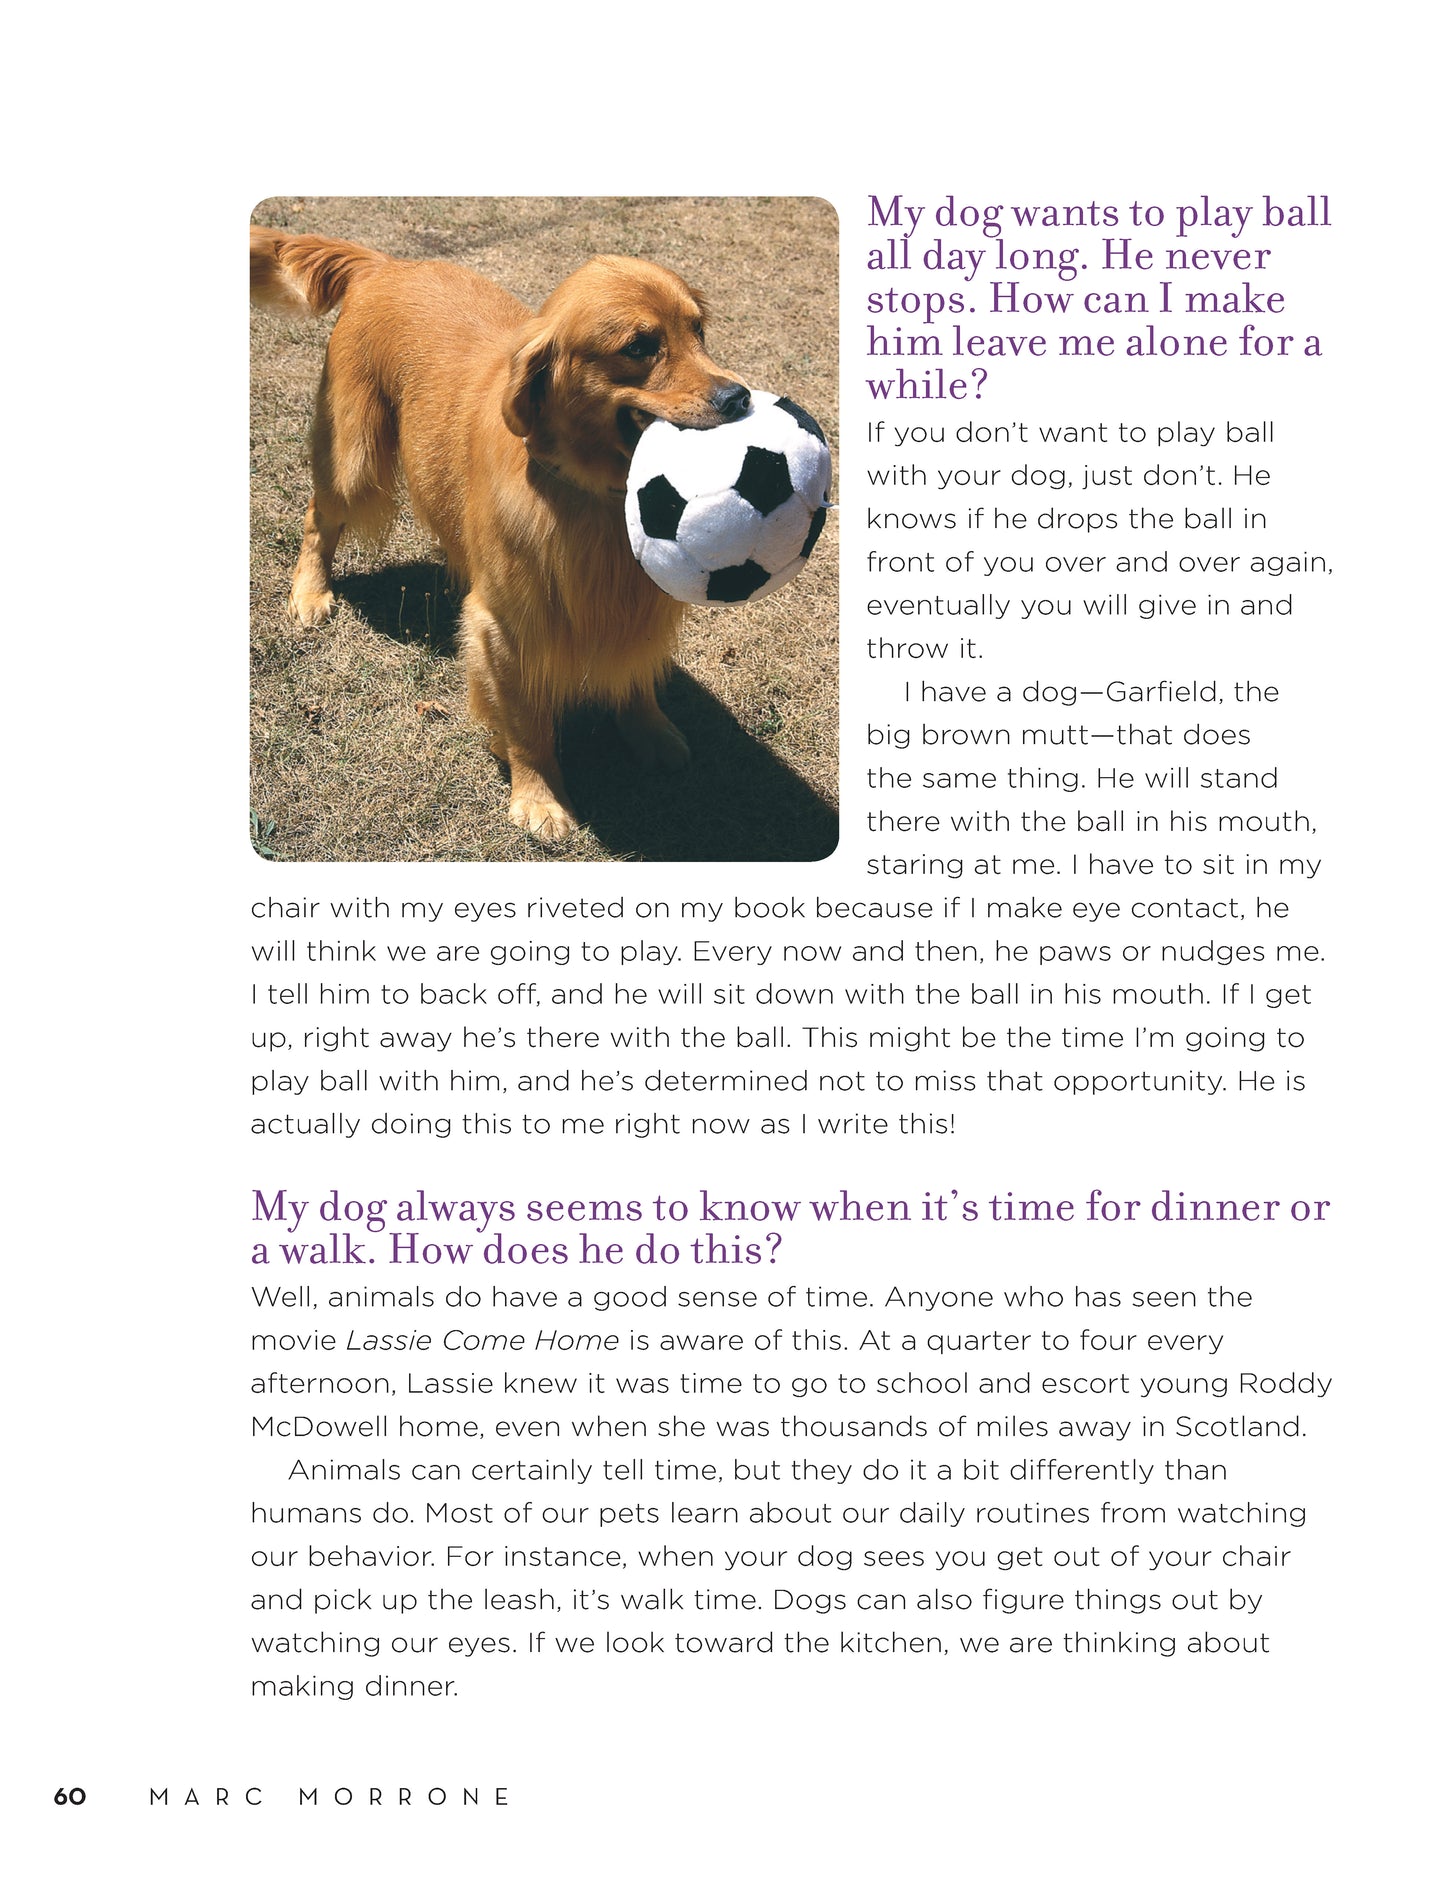 Marc Morrone's Ask the Dog Keeper